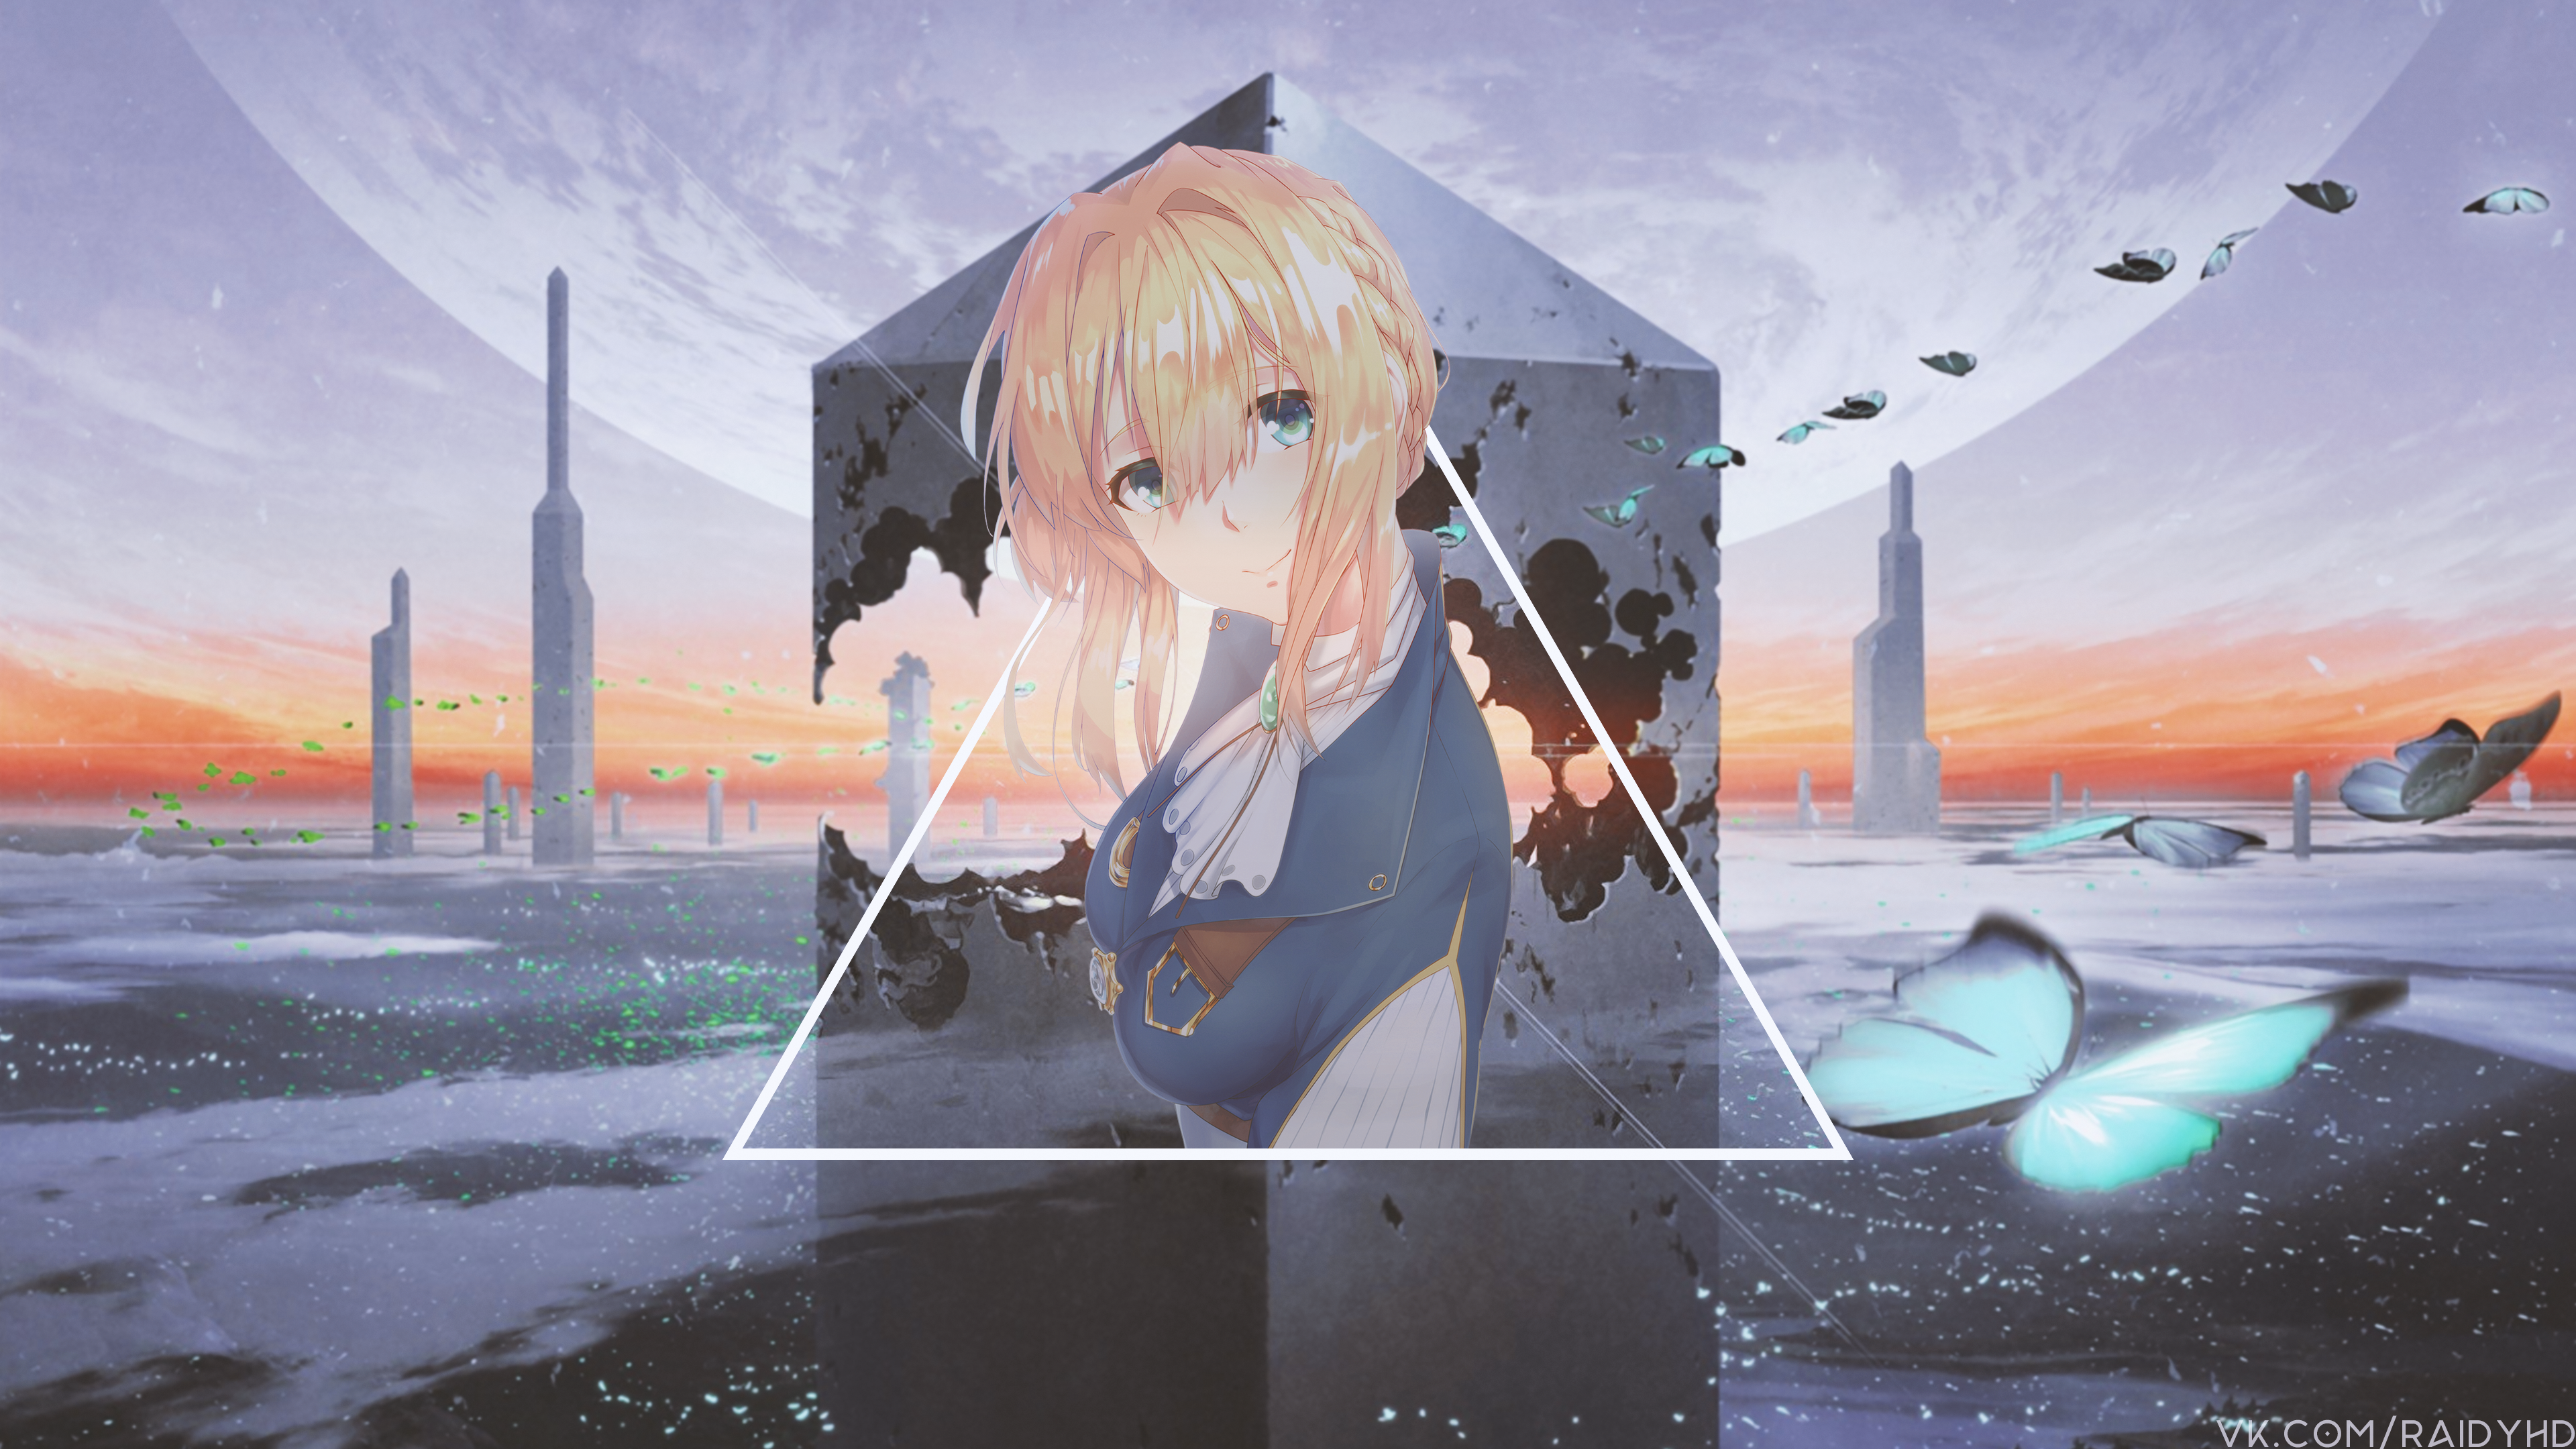 Anime 3840x2160 anime girls picture-in-picture anime Violet Evergarden